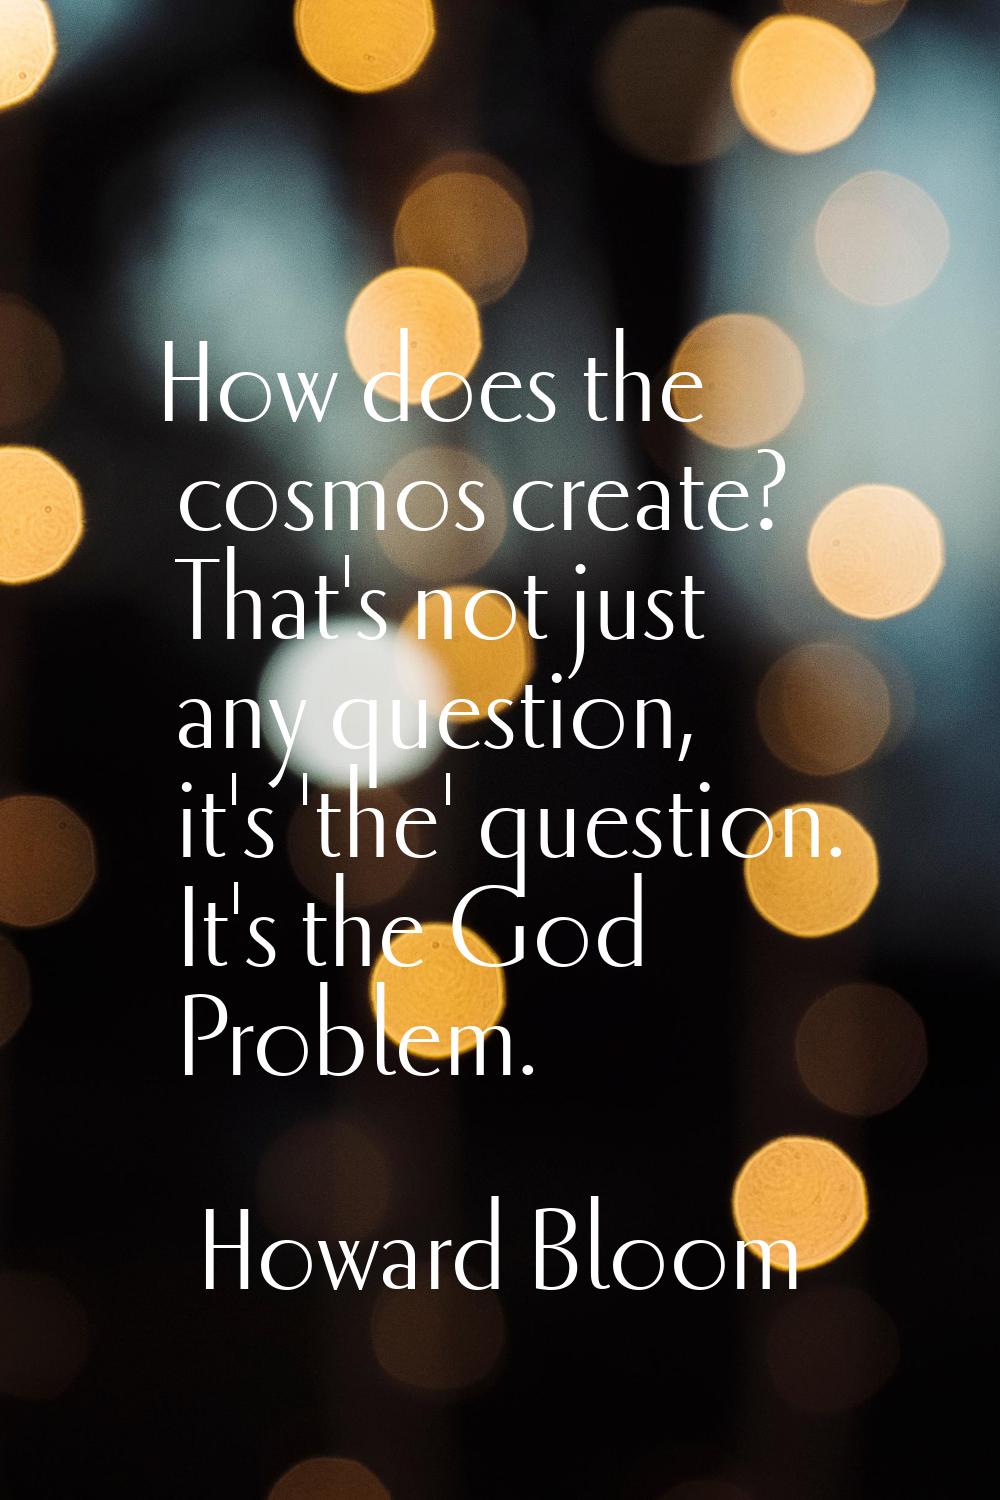 How does the cosmos create? That's not just any question, it's 'the' question. It's the God Problem